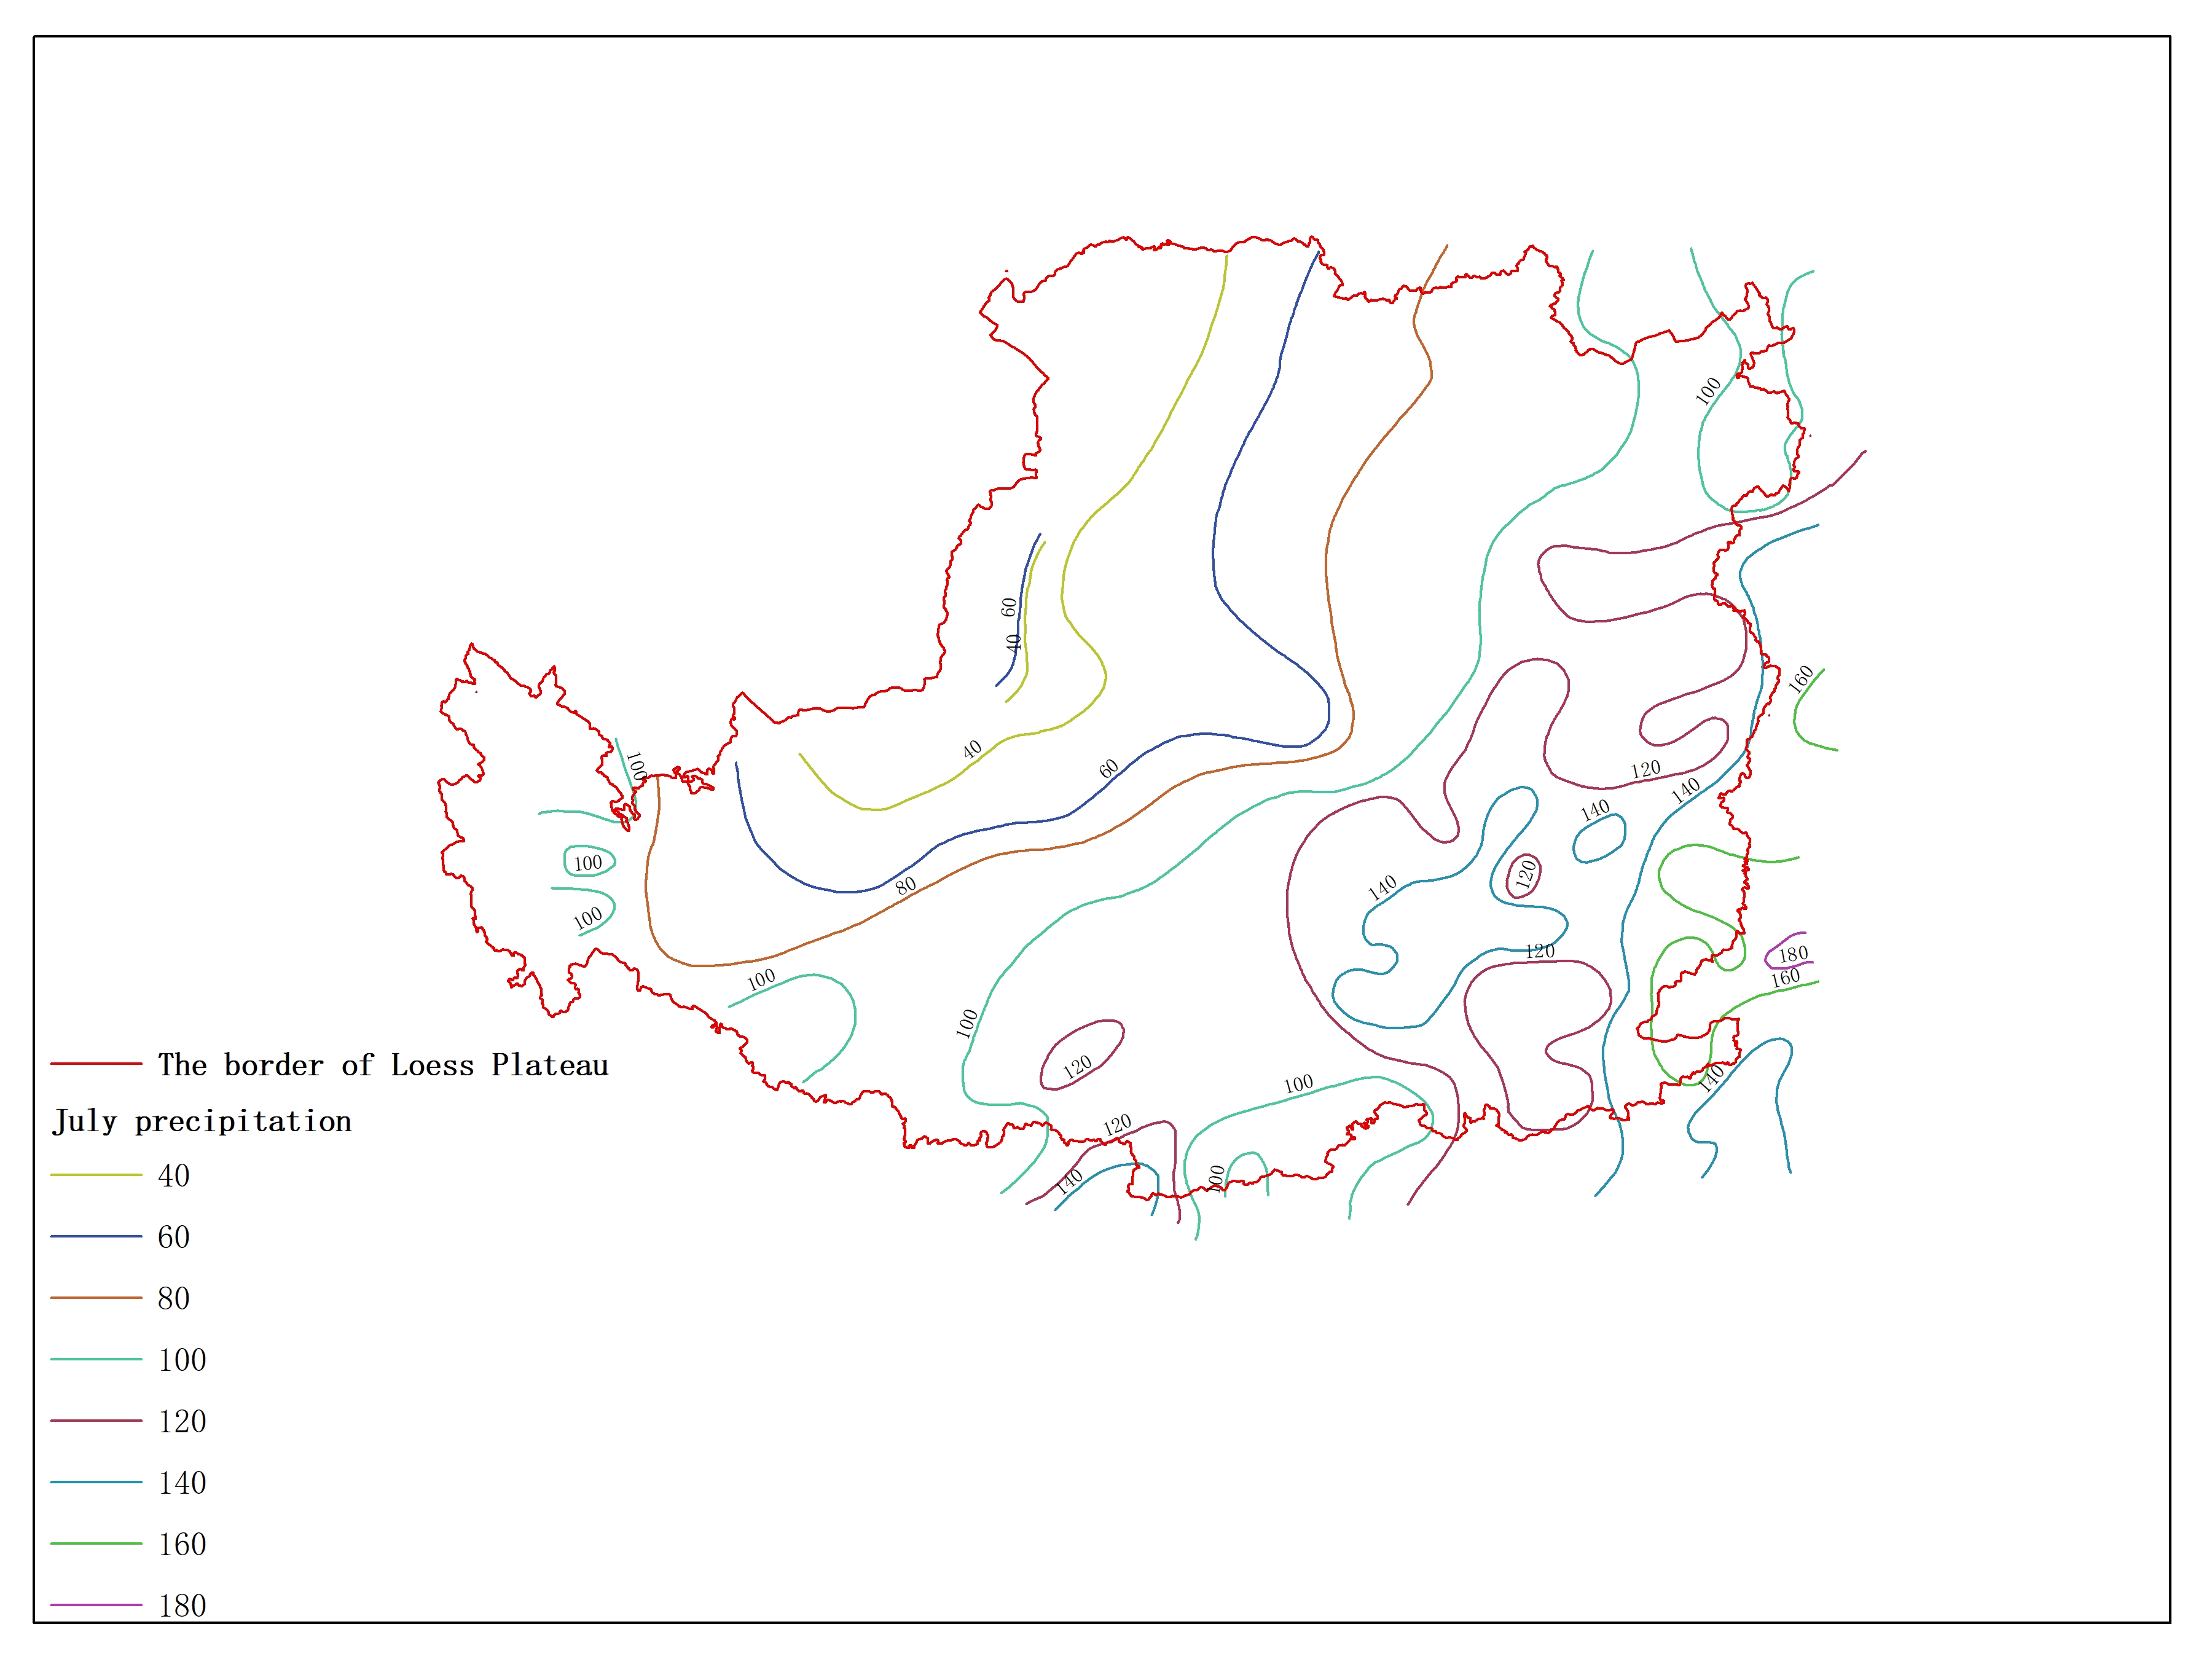 Agricultural climate resource atlas of Loess Plateau-July precipitation